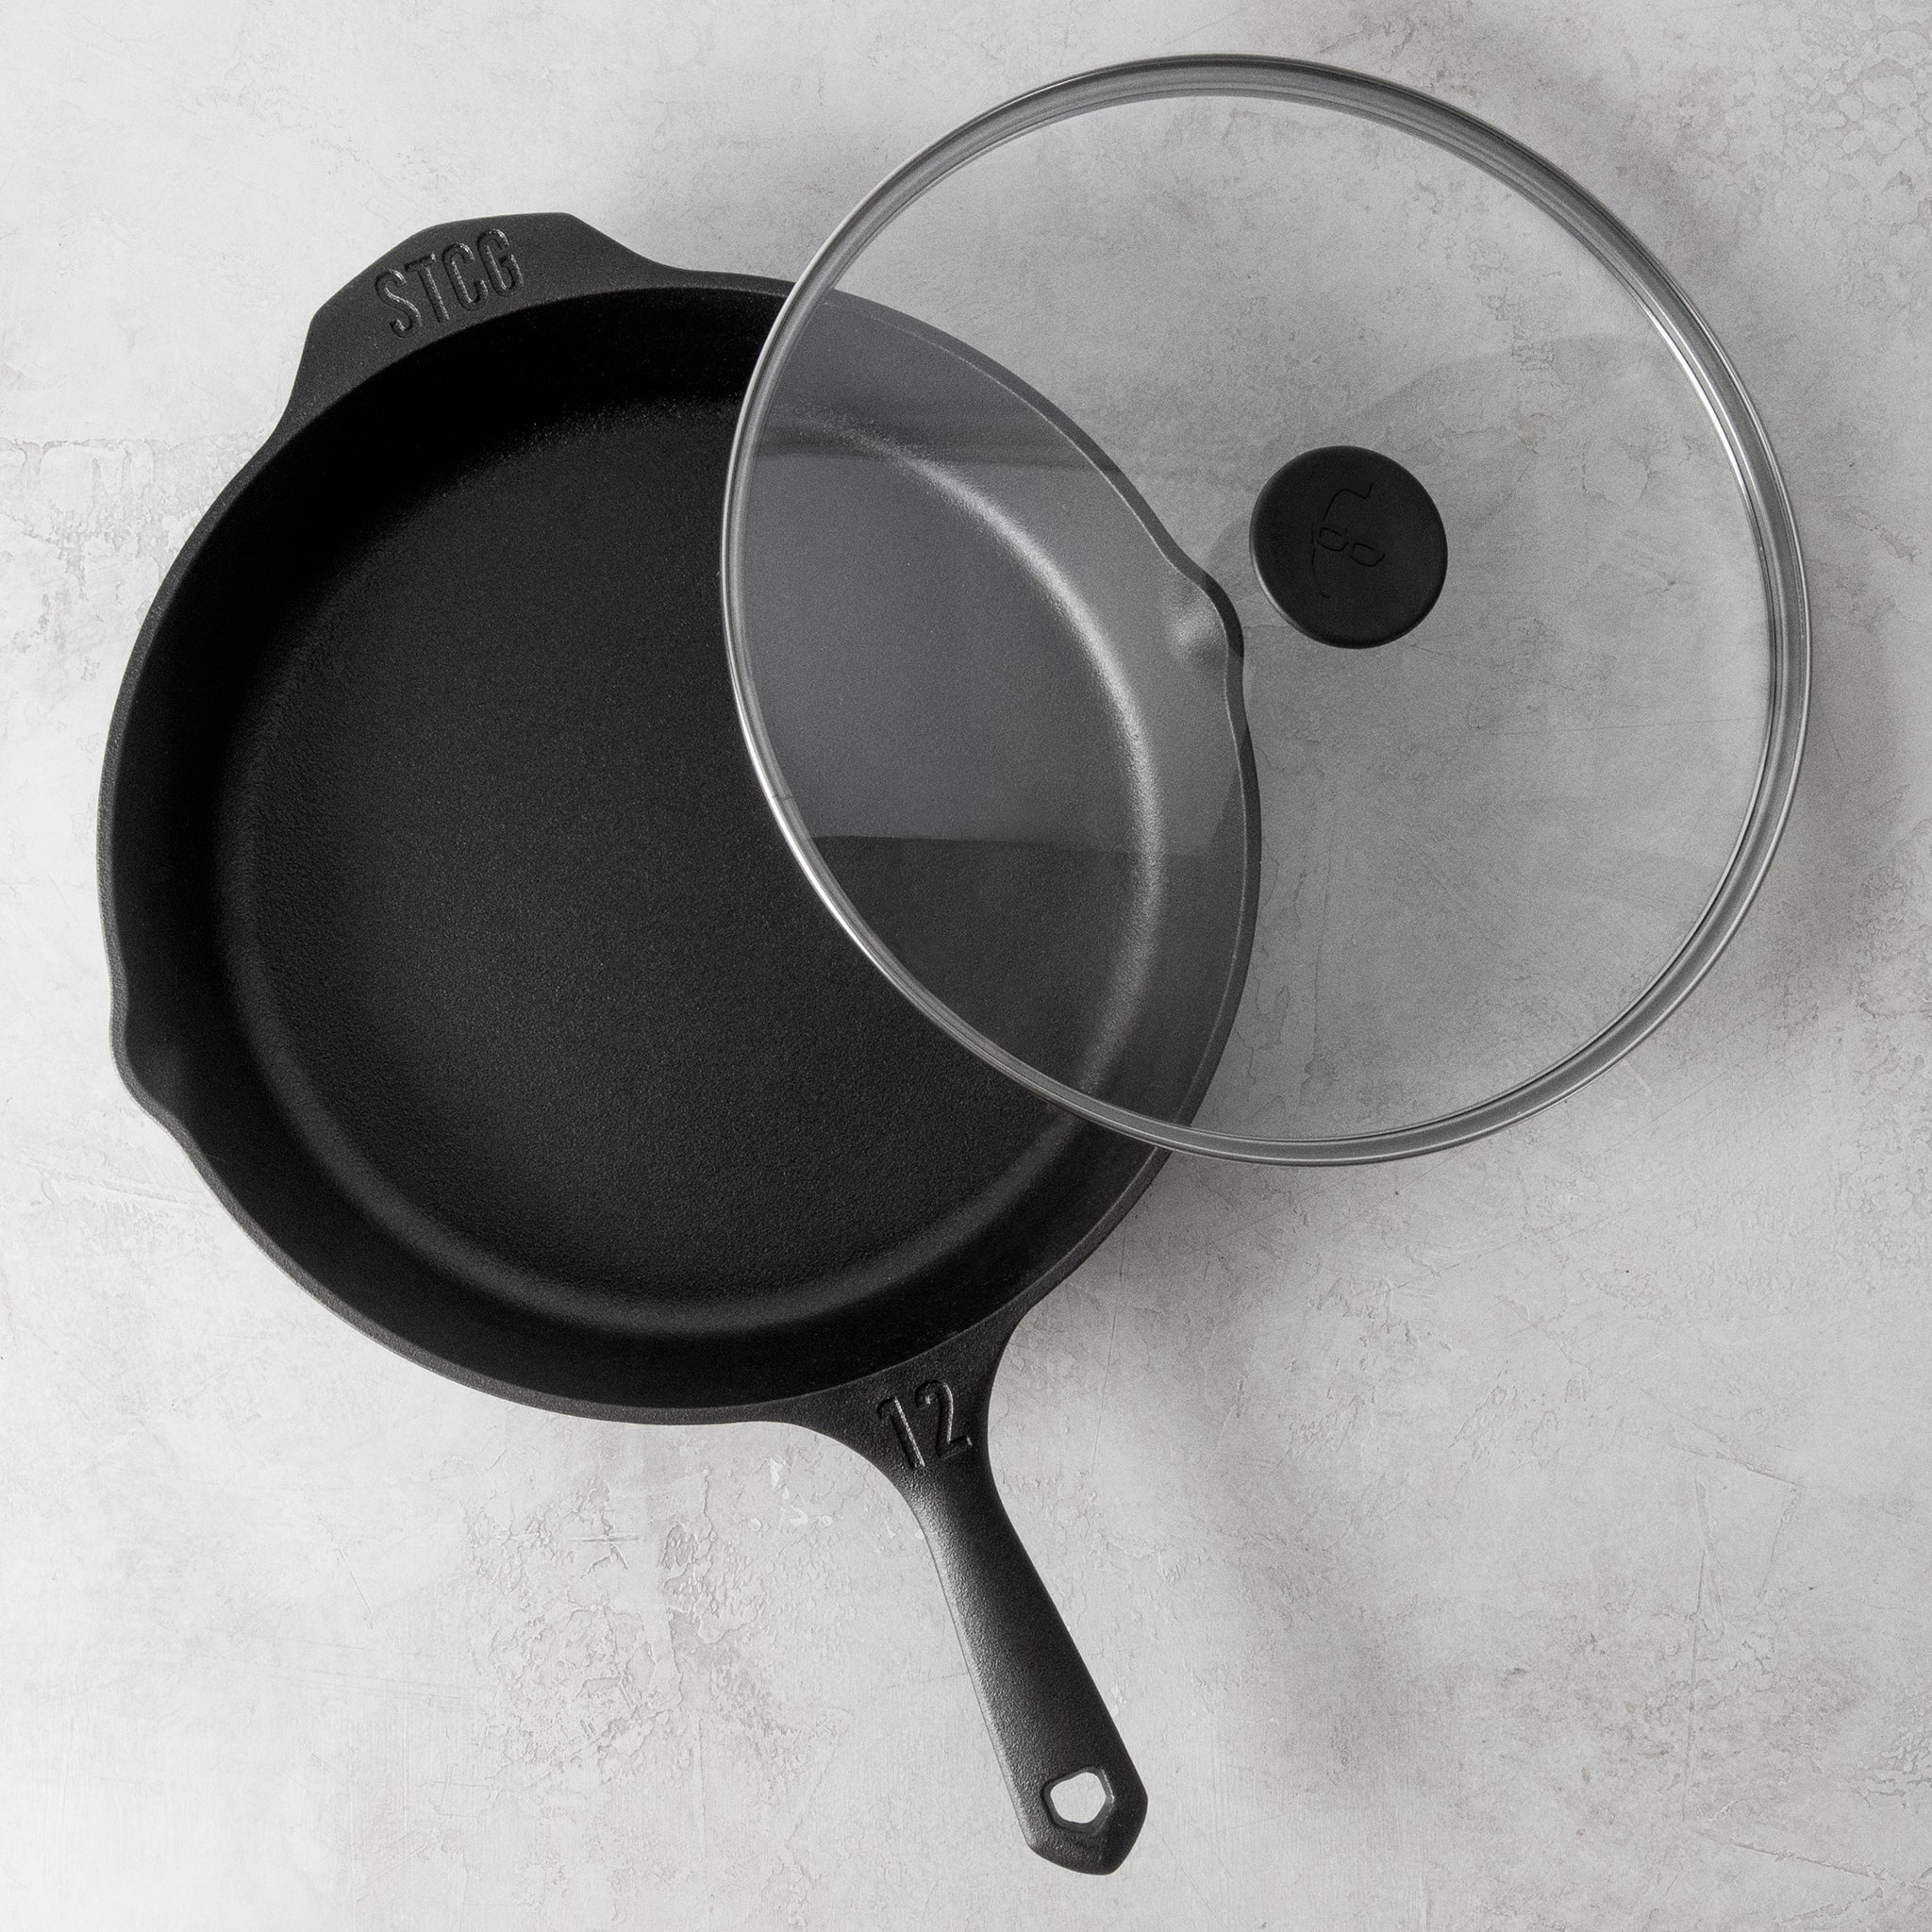 This Cast Iron Skillet Set Comes With a Lid, and It's Over 20% Off Right Now